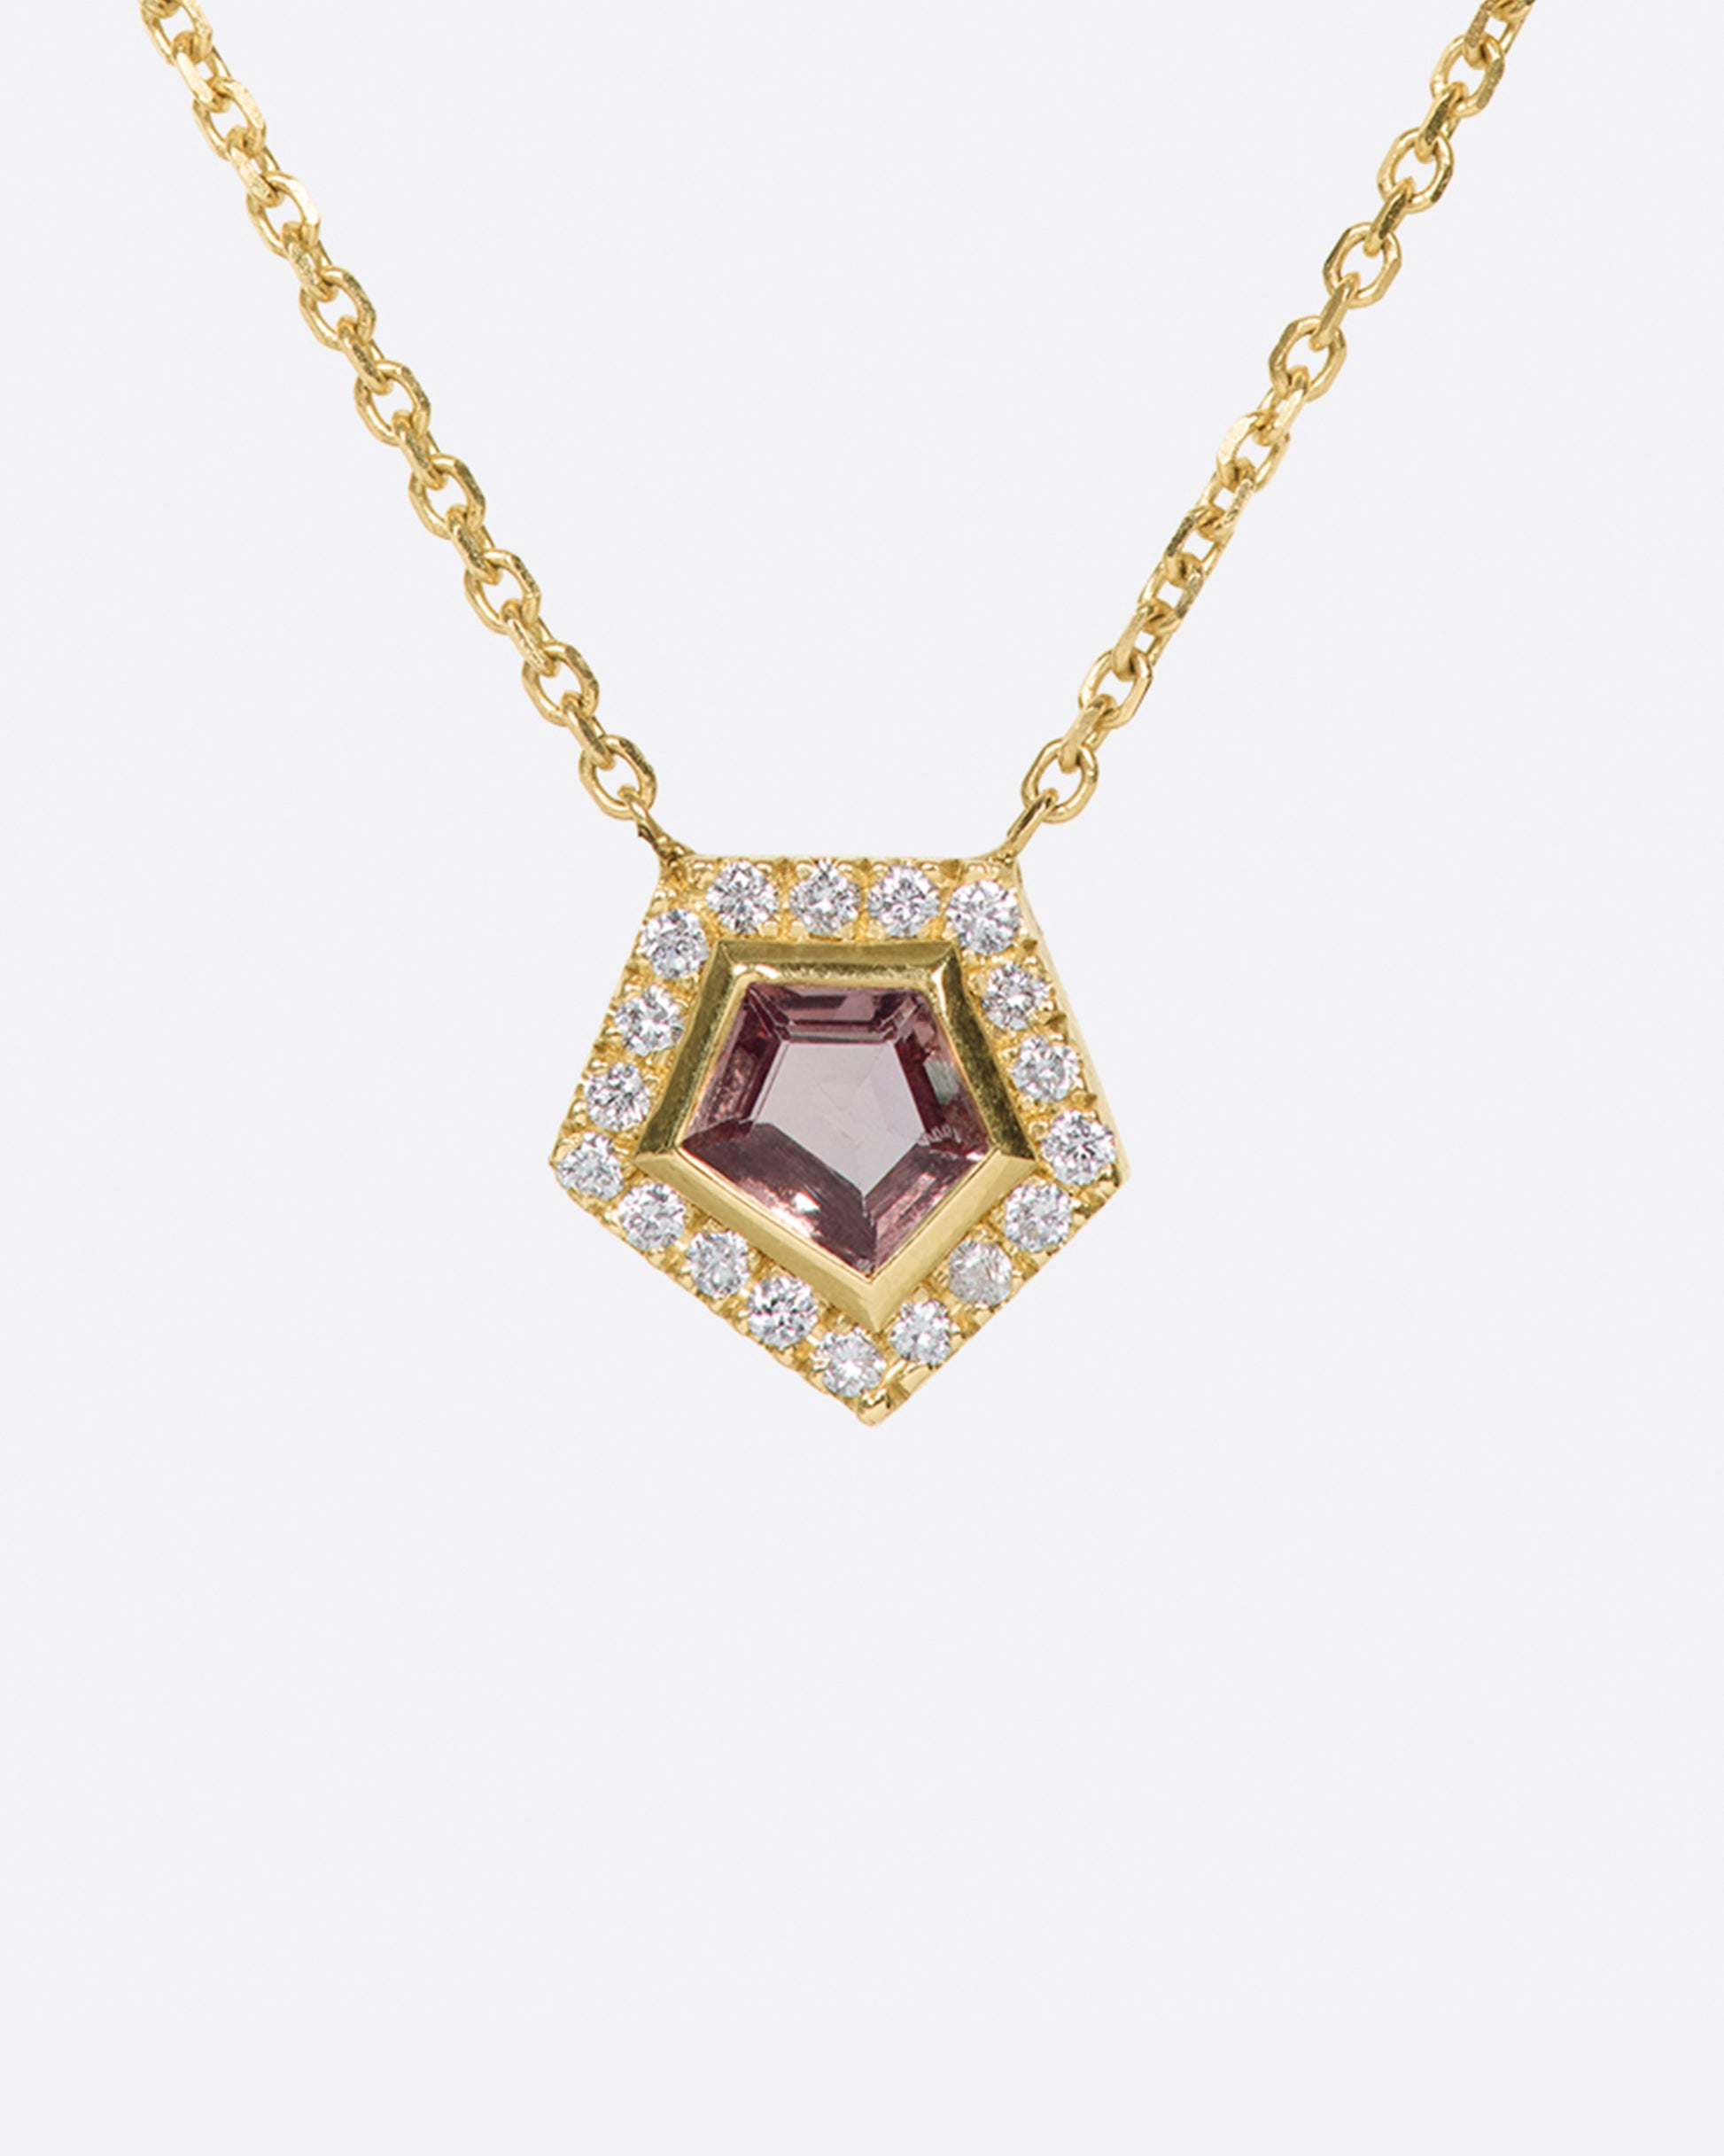 A shield shaped pink sapphire pendant necklace with a diamond halo.